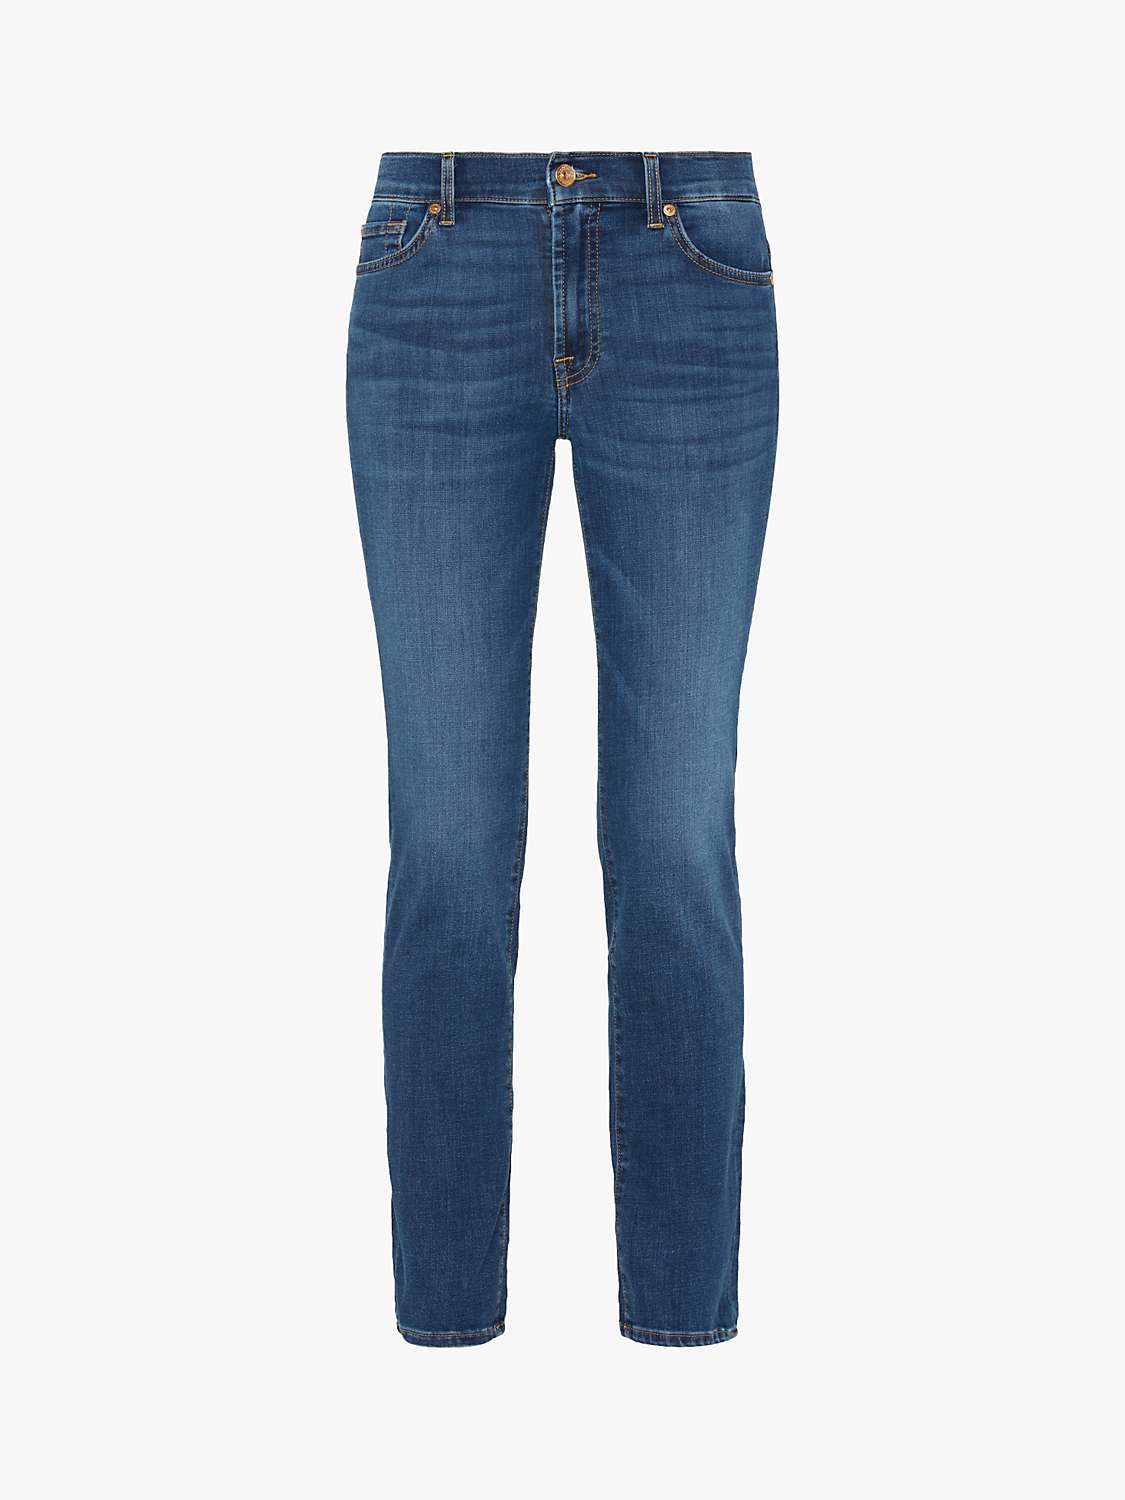 Buy 7 For All Mankind Roxanne B(Air) Jeans, Duchess Online at johnlewis.com